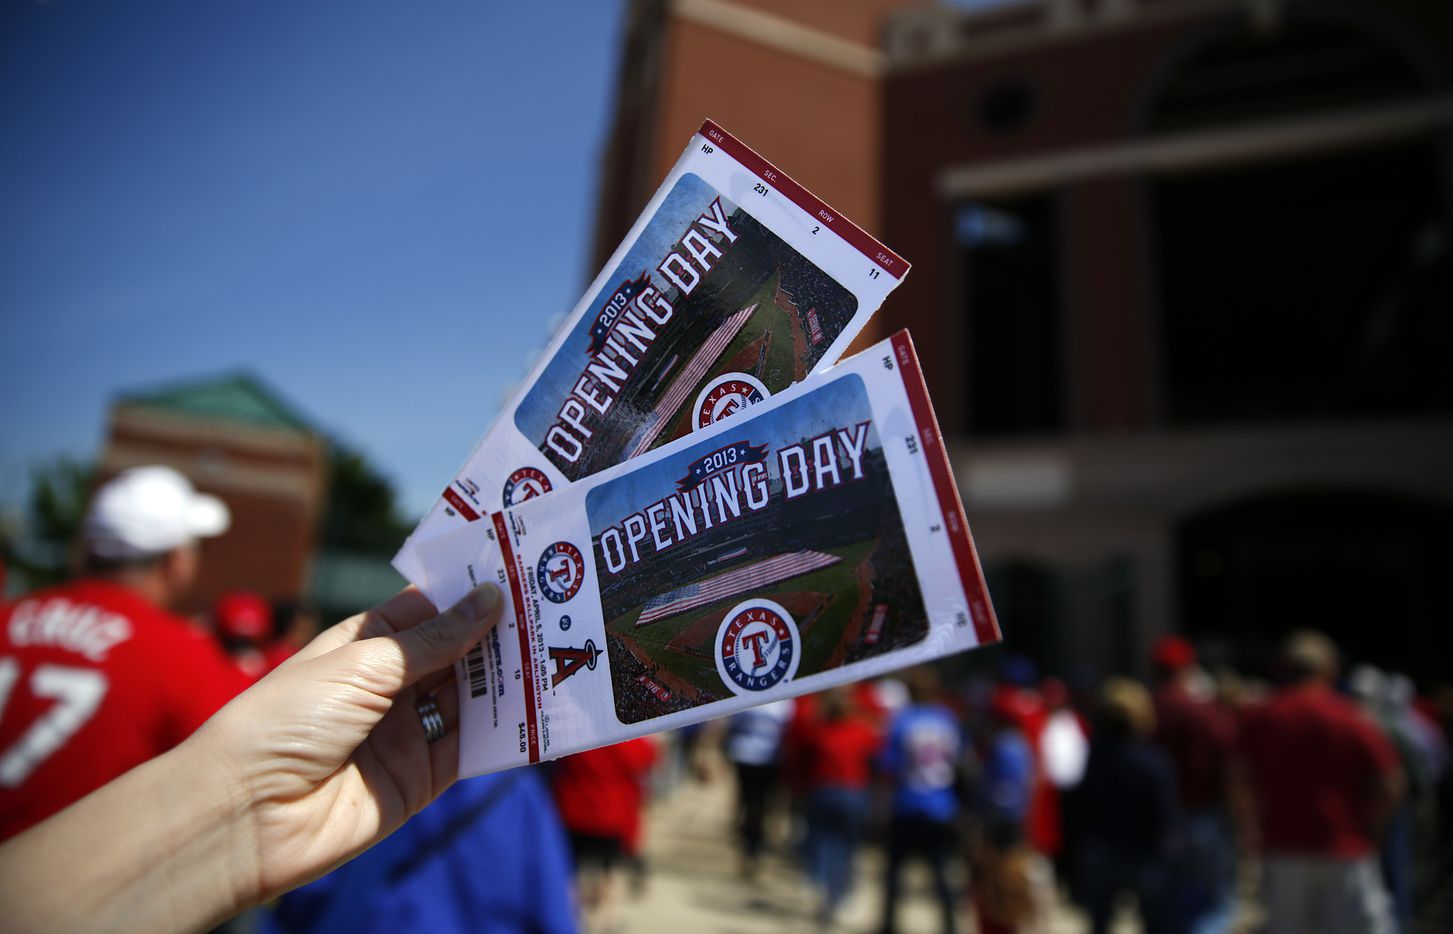 The price of a ticket to a Ranger’s game sank in April like the team’s performance, to...